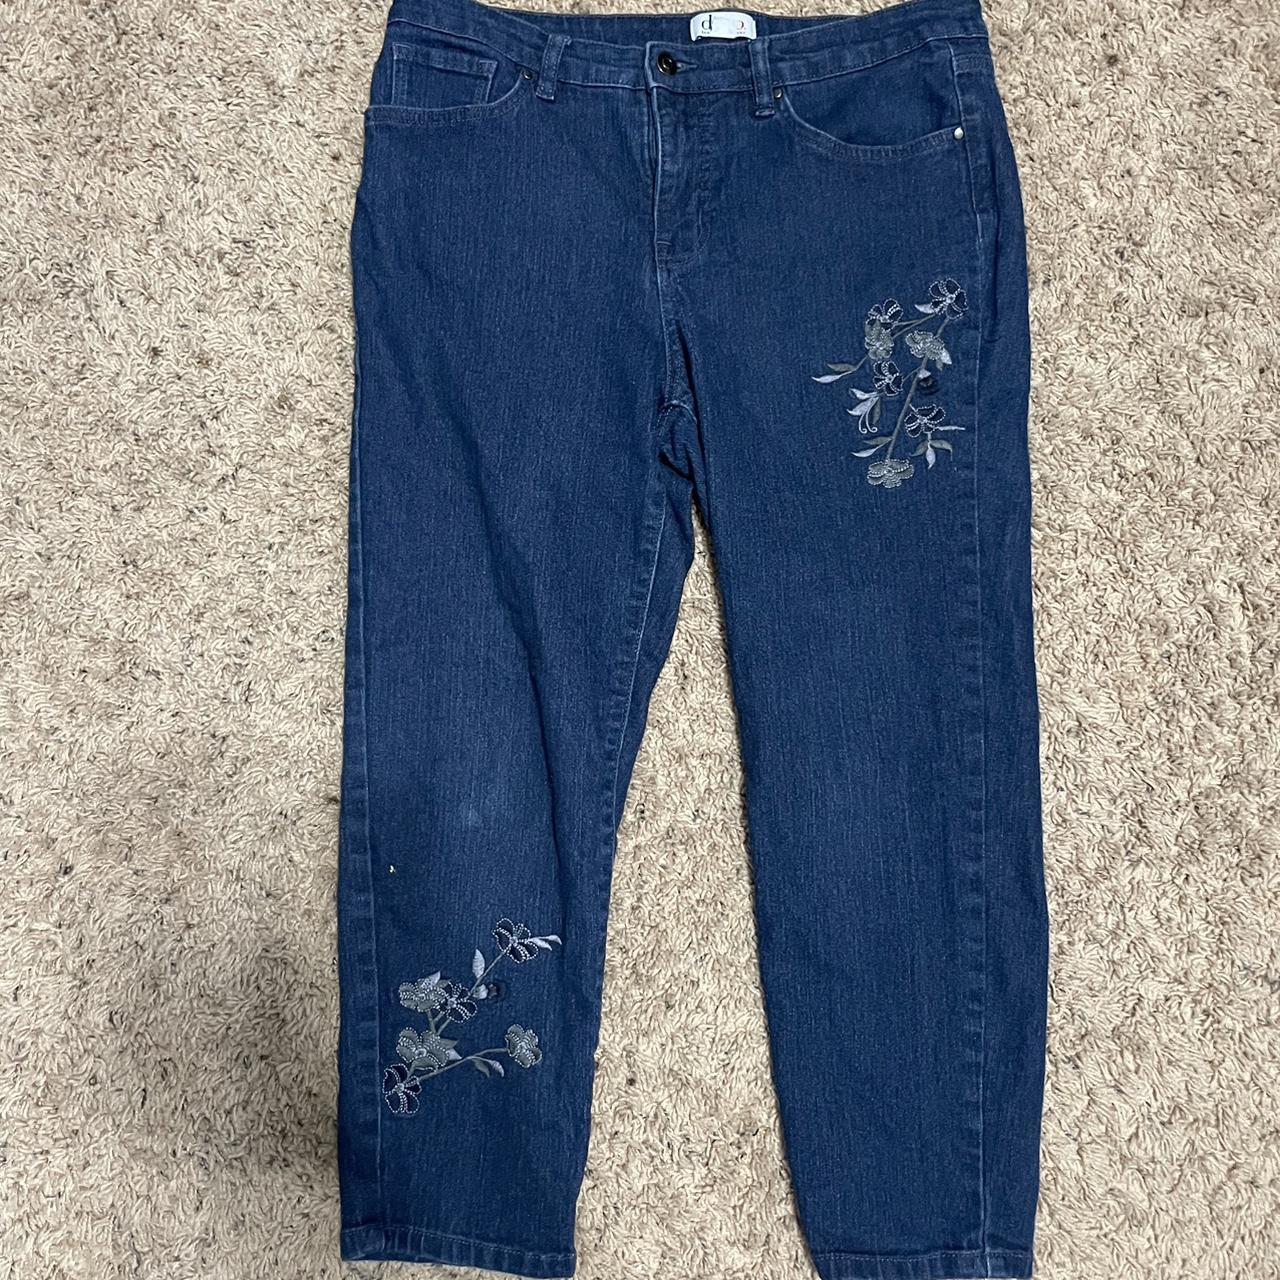 Denim & Co. Embroidered Jeans